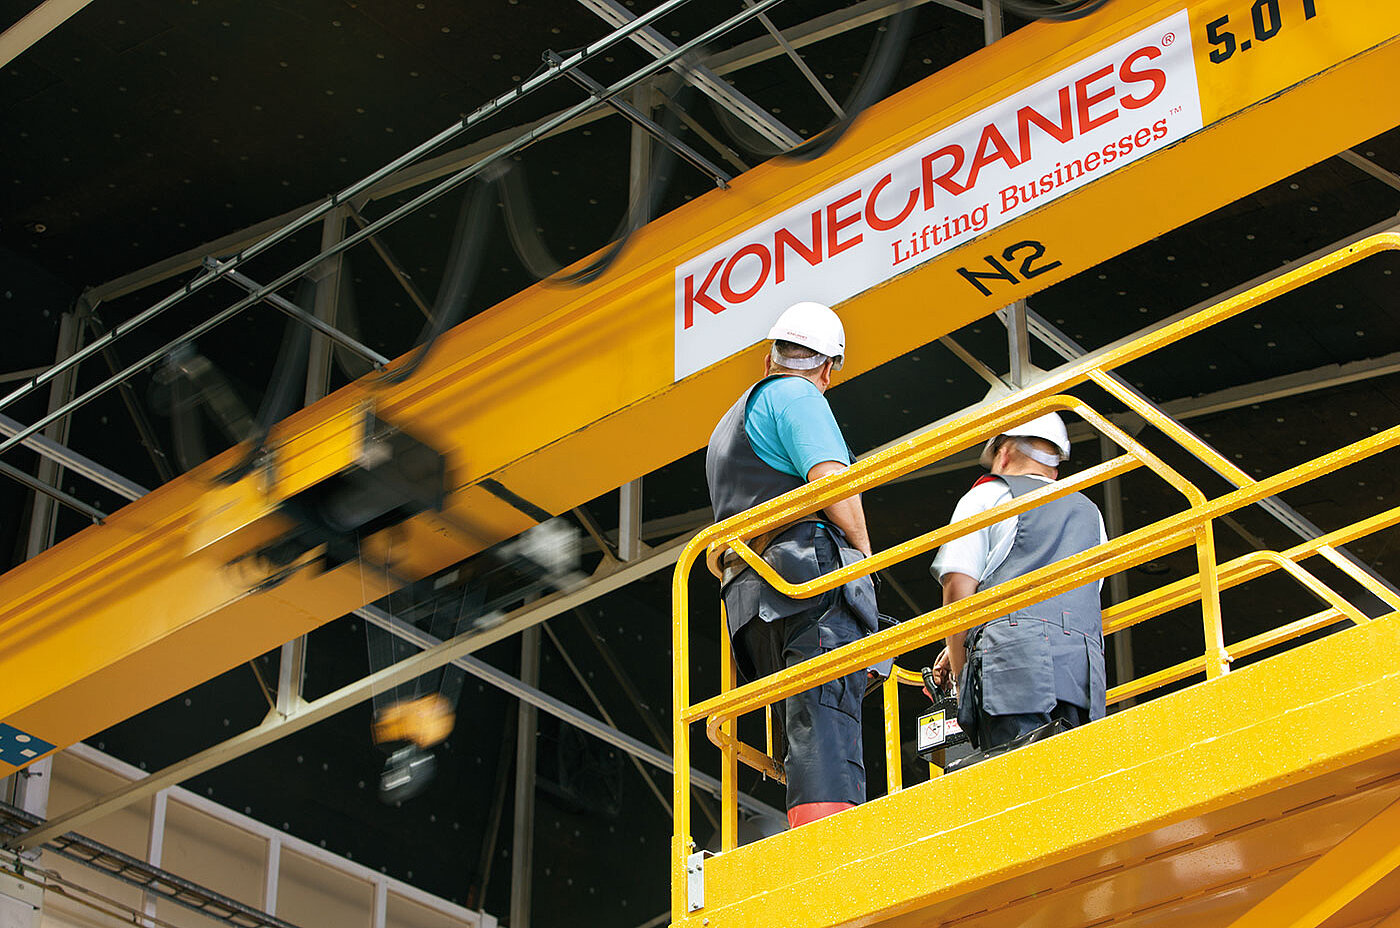 Konecranes - one of the world leaders in Lifting Businesses